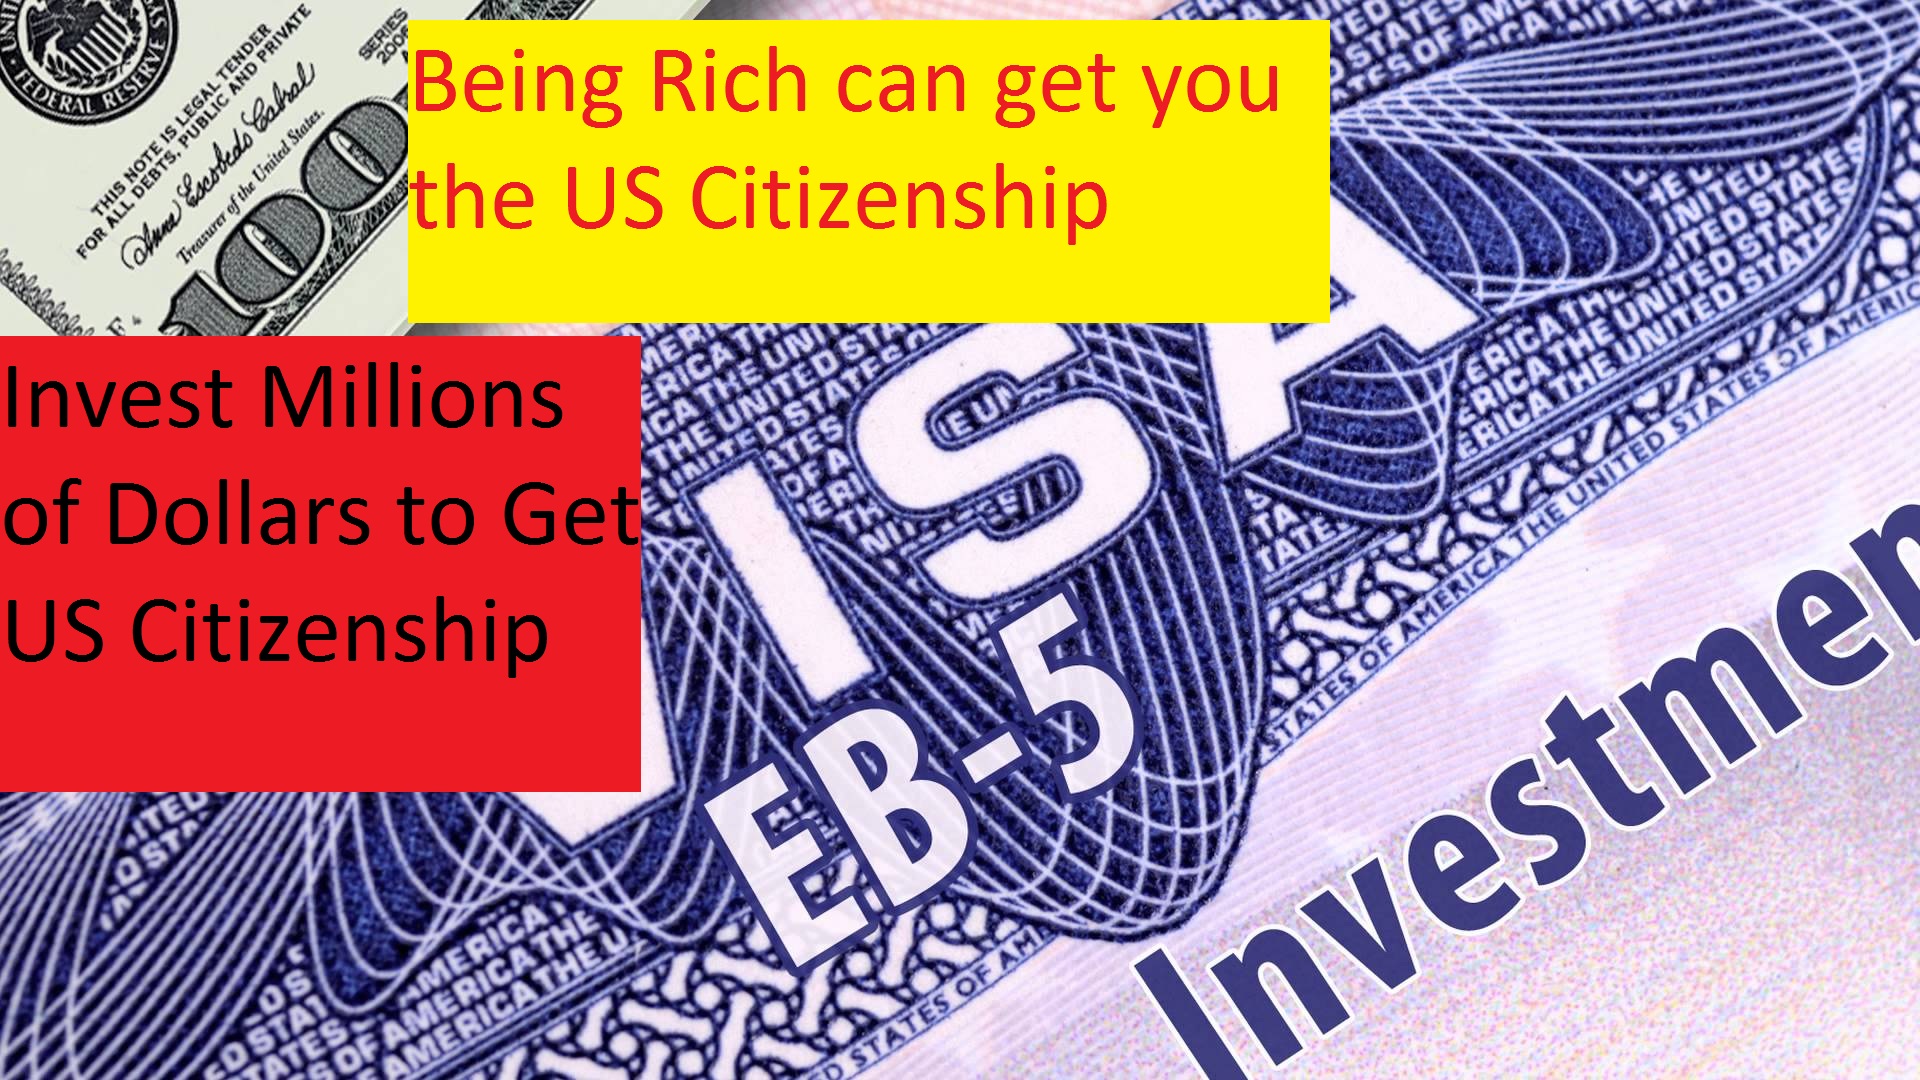 Being Rich can get you the US Citizenship